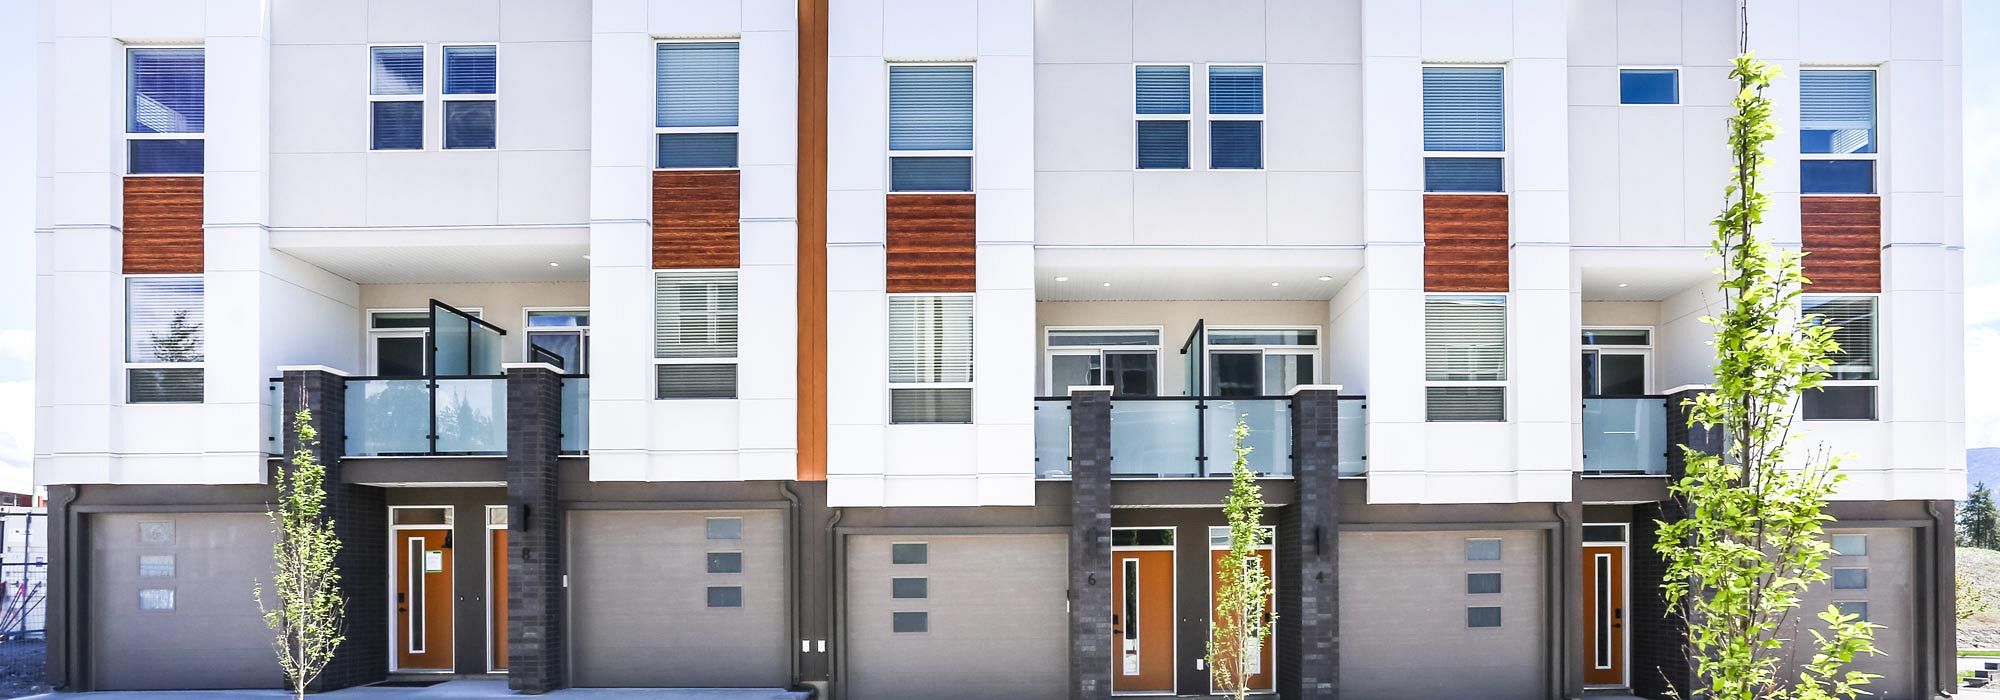 Flexible 3 bedroom+ townhomes at University Village